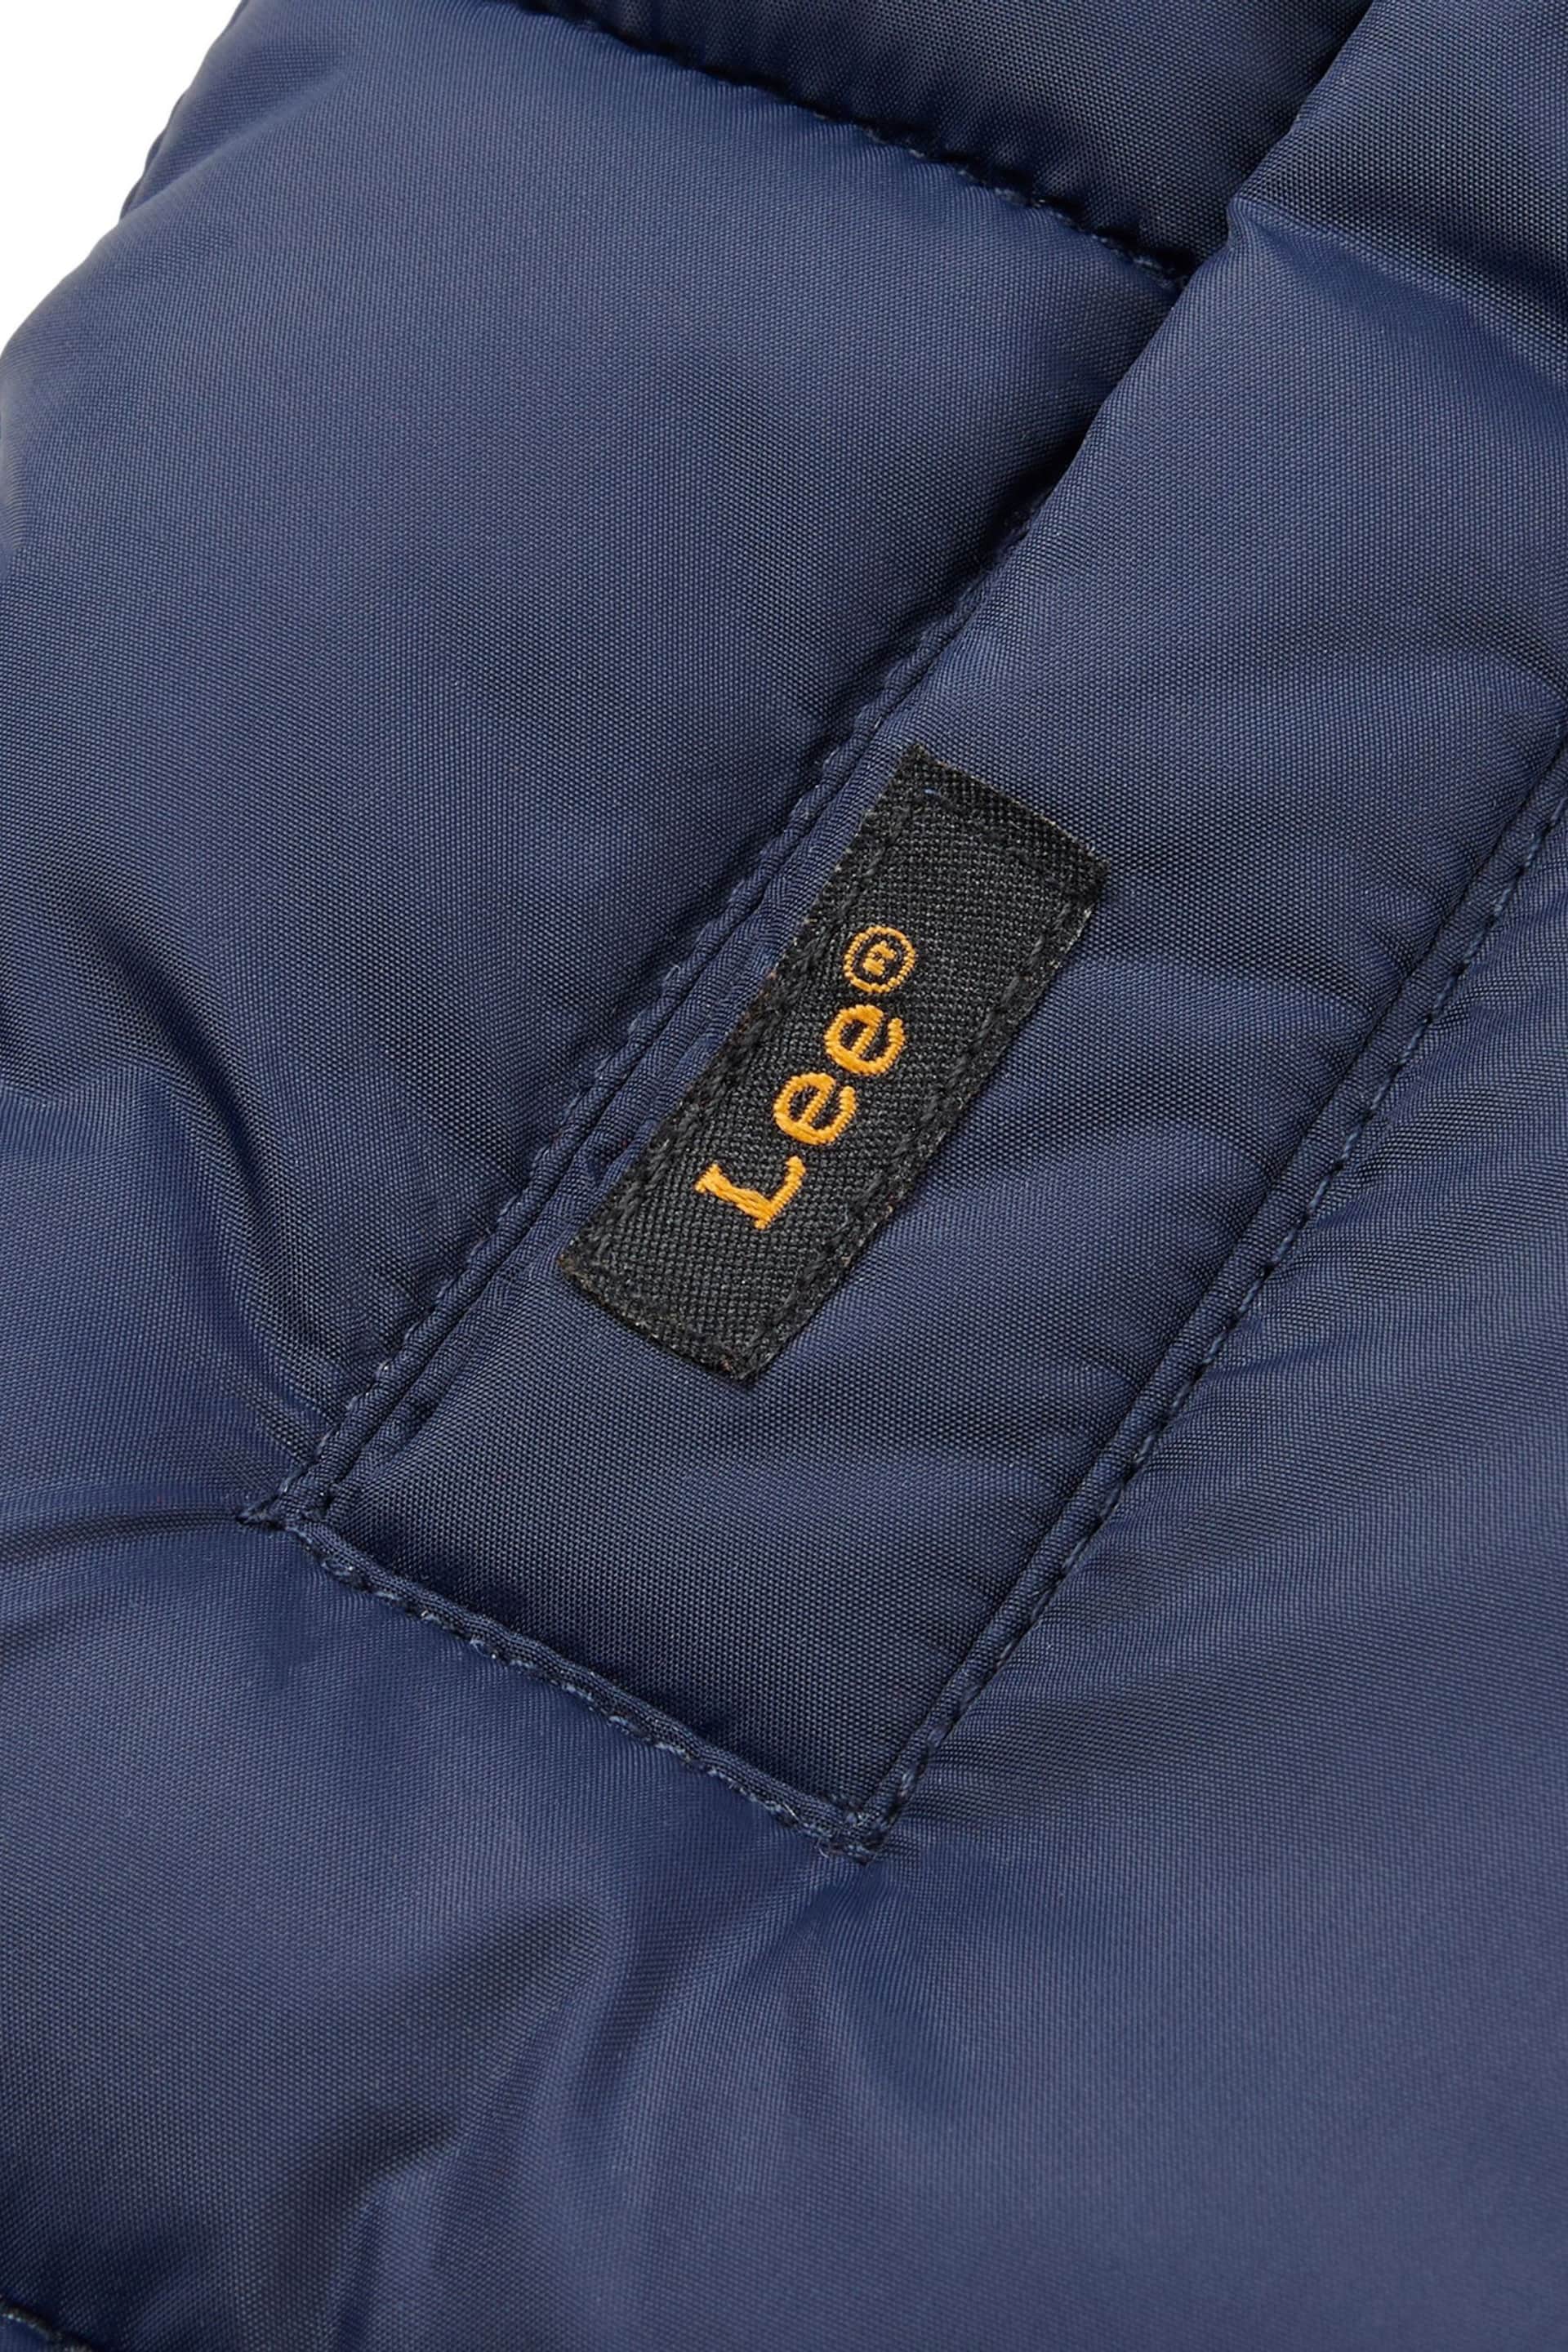 Lee Graphic Logo Puffer Gilet - Image 3 of 3